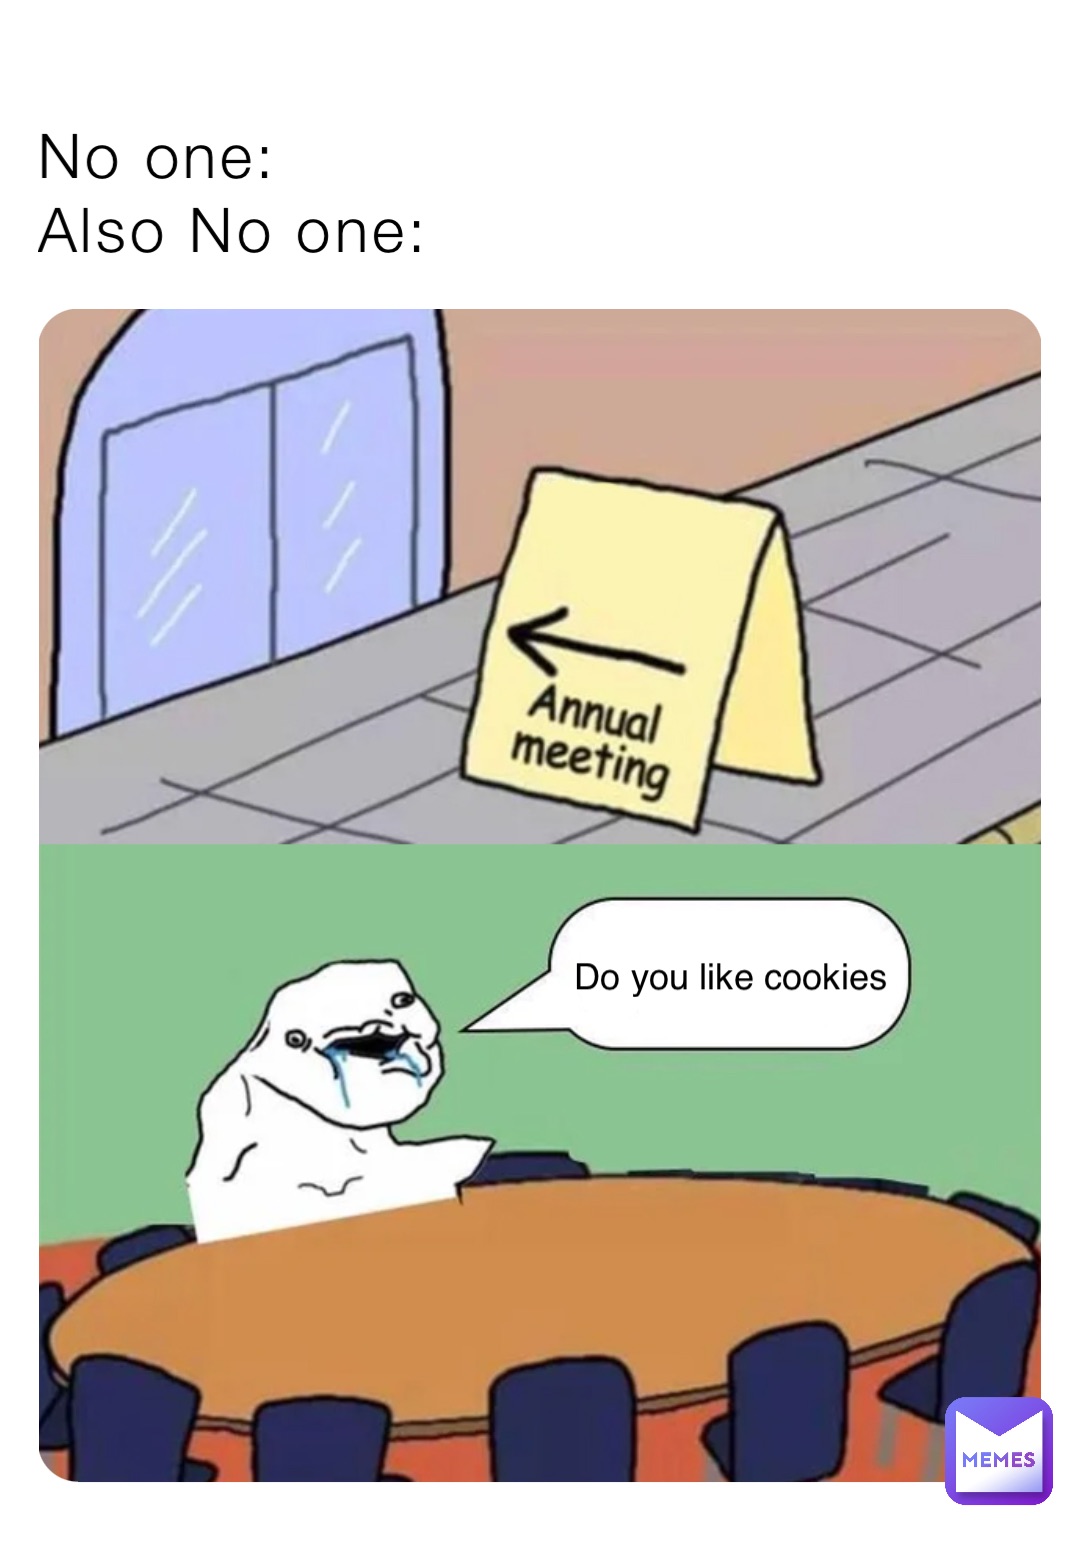 No one: 
Also No one: Do you like cookies